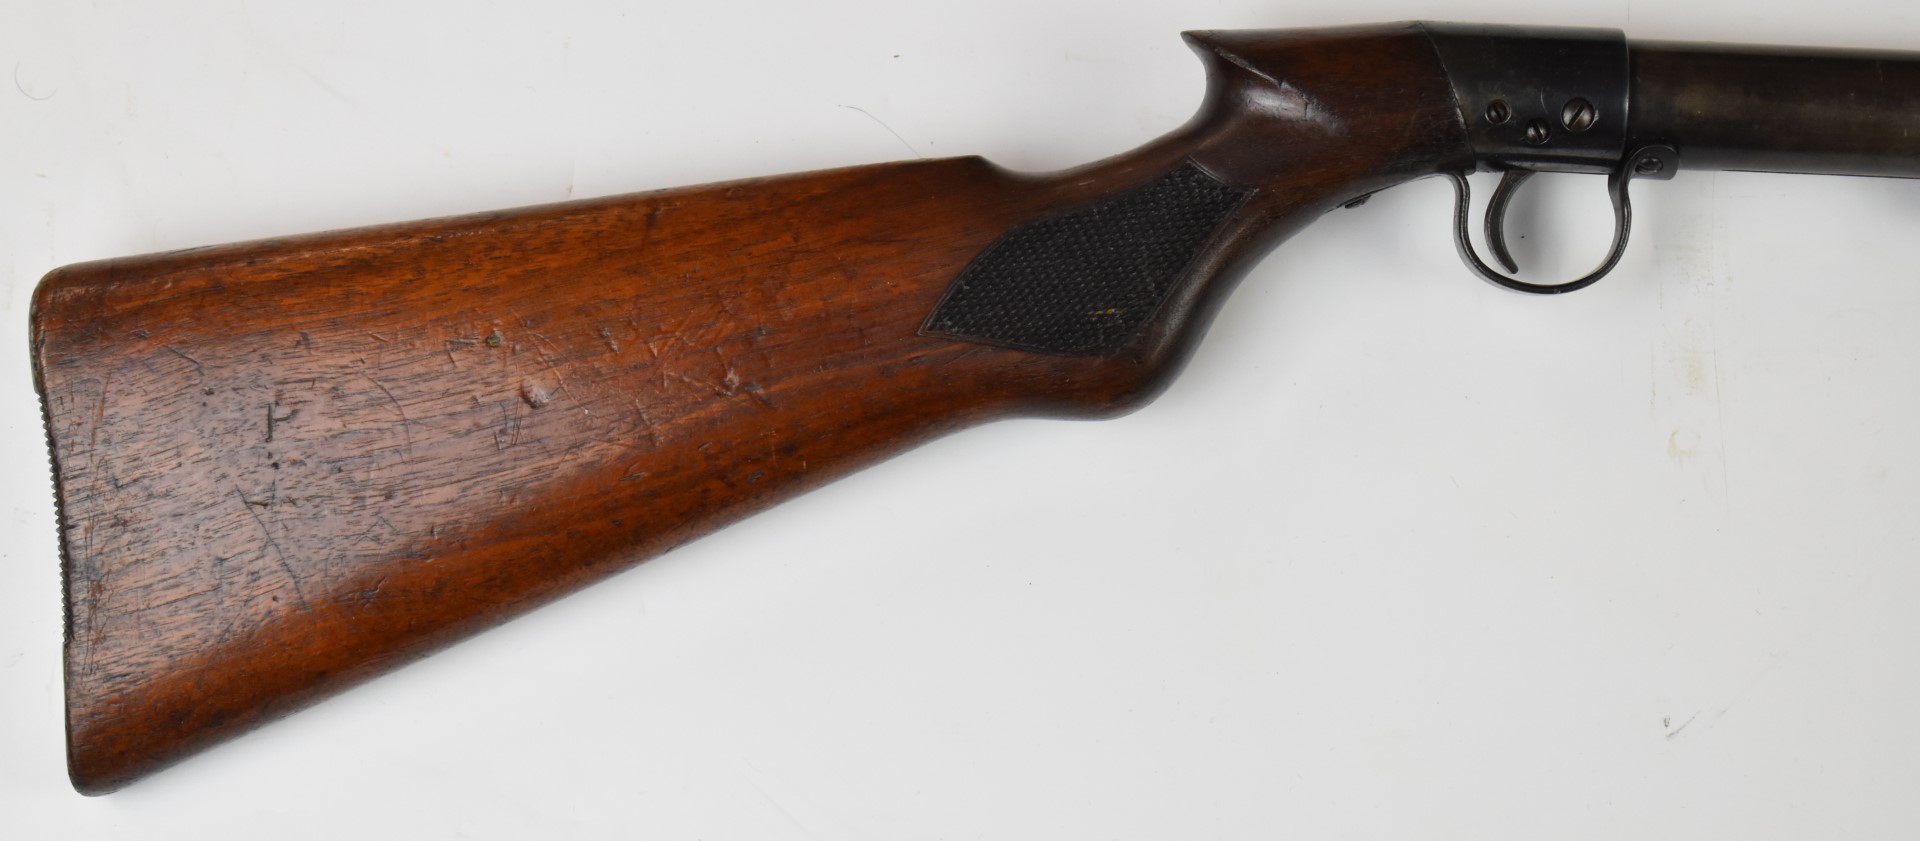 BSA Standard No 1 Light or Ladies .177 under-lever air rifle with chequered semi-pistol grip and - Image 4 of 8